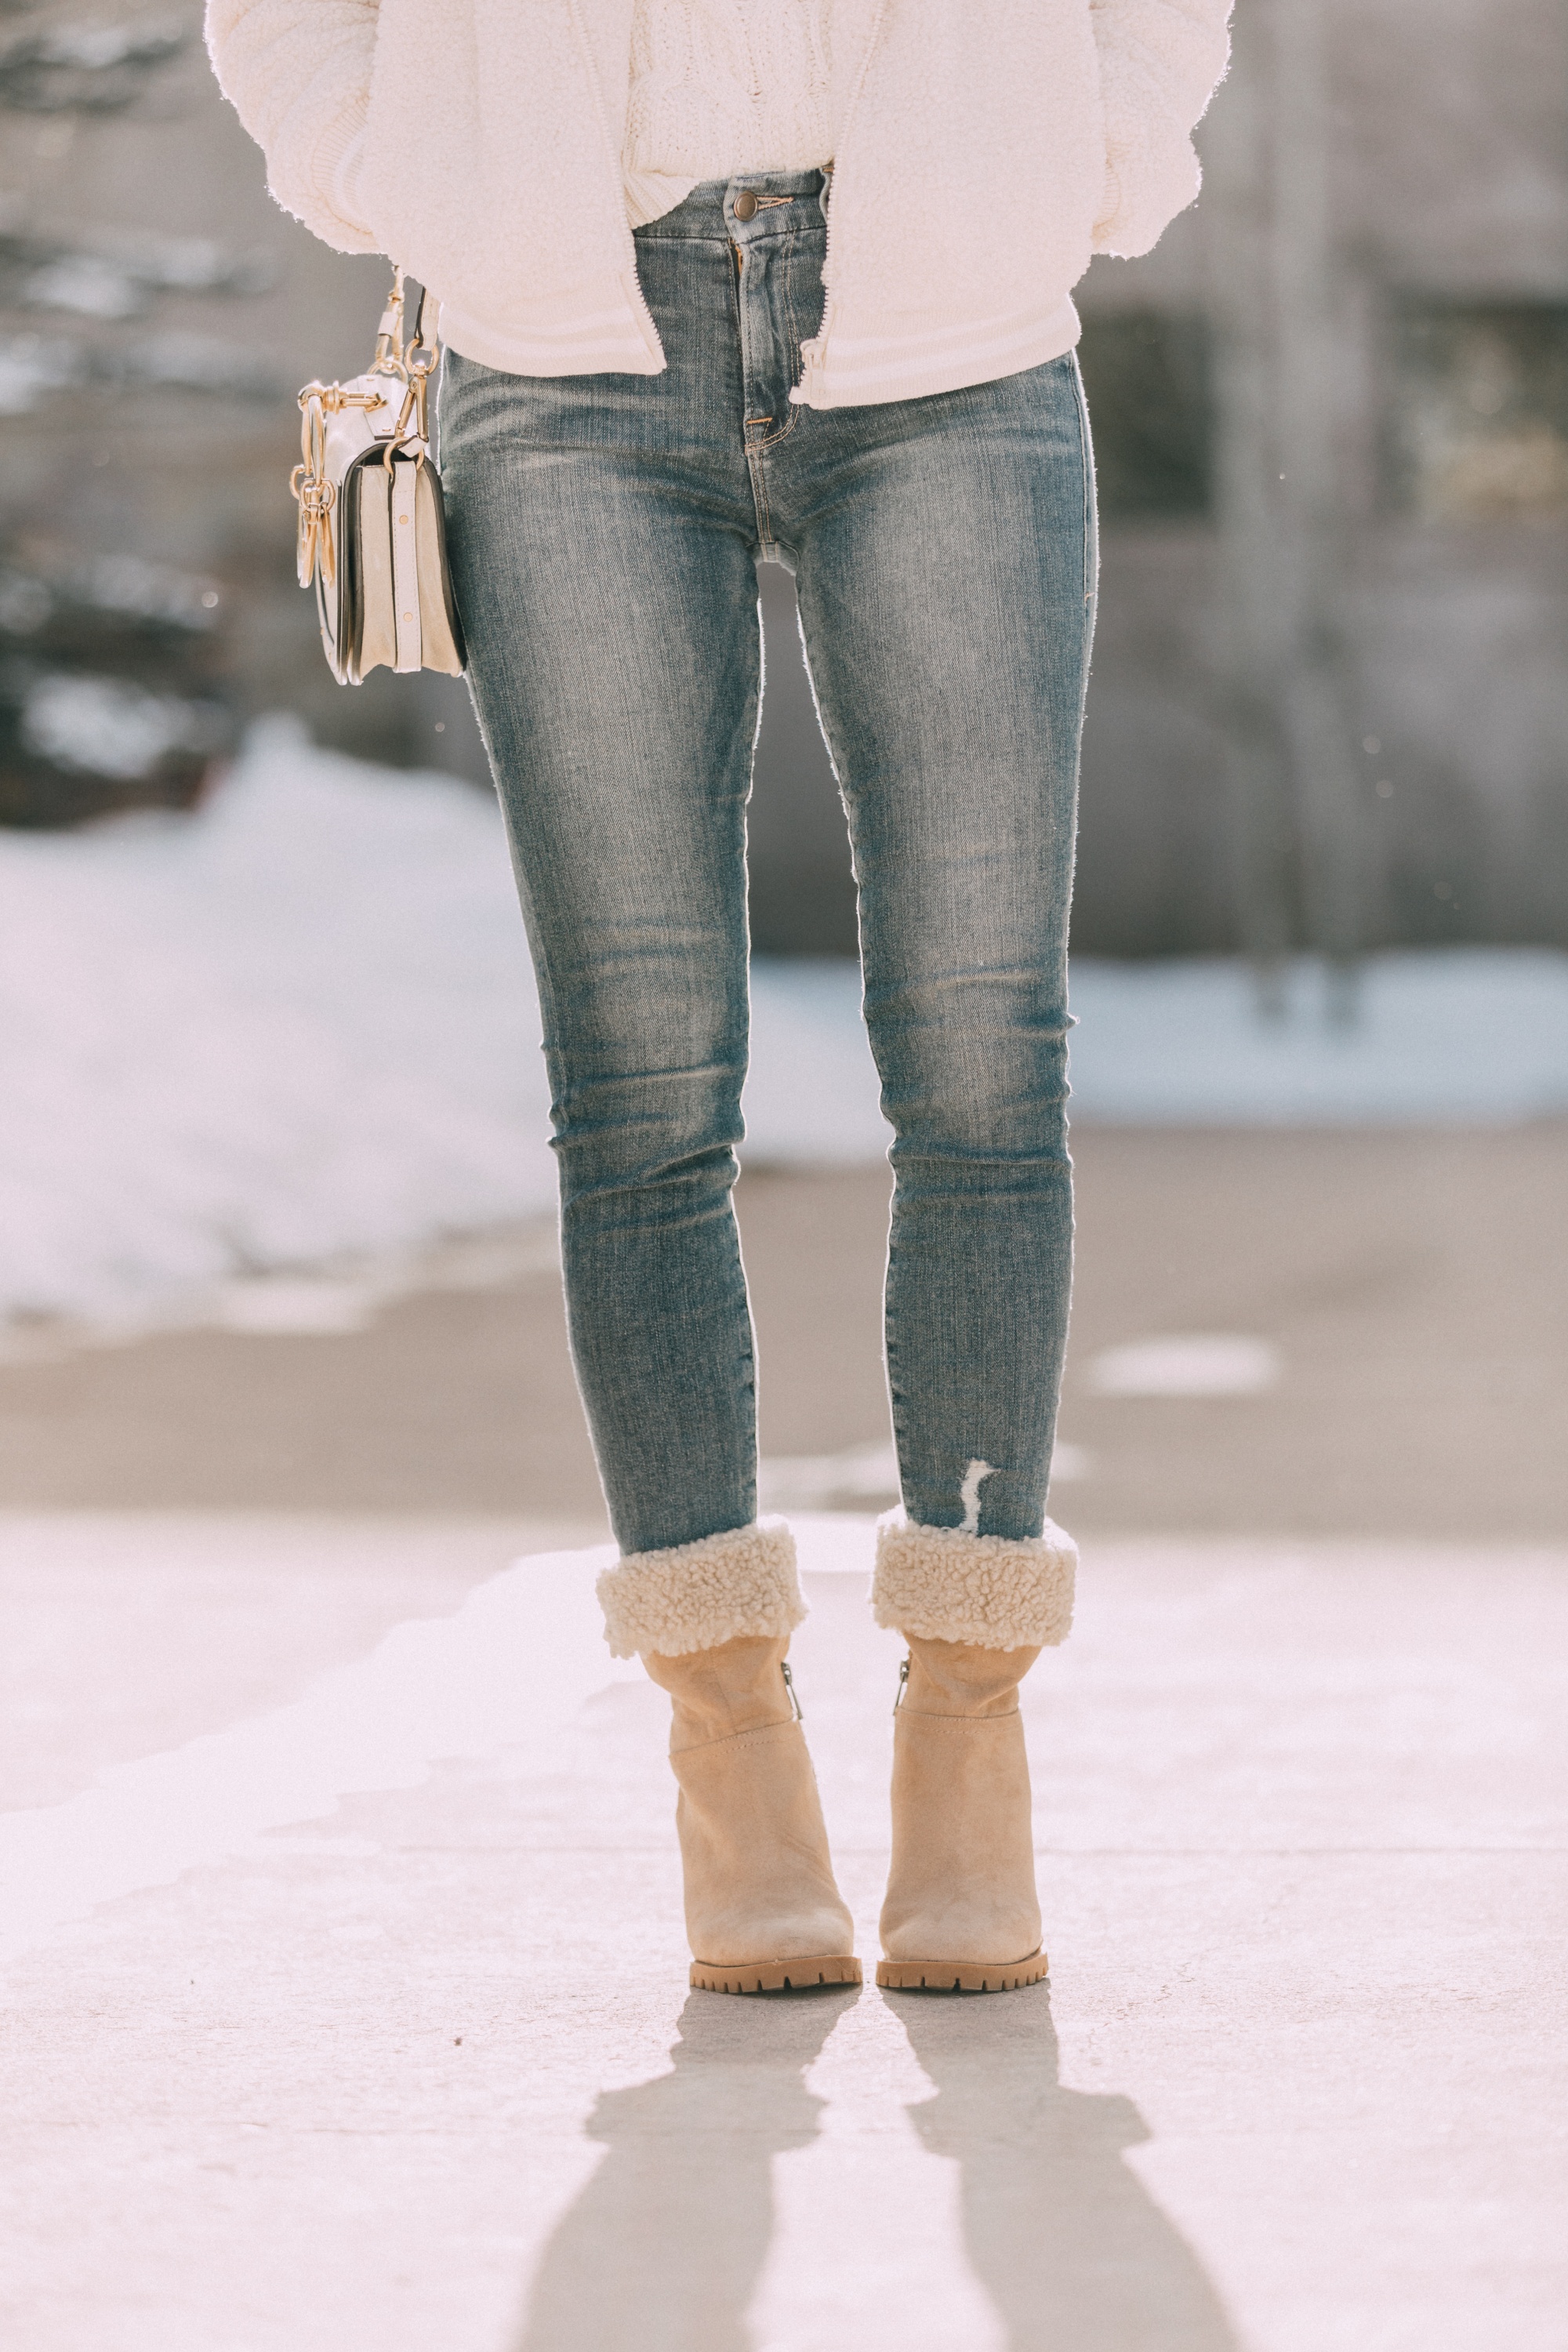 walmart fashion blogger outfit faux shearling foldover boots faux fur teddy Scoop jacket, white Scoop cable knit sweater, medium wash skinny jeans in Telluride, Colorado